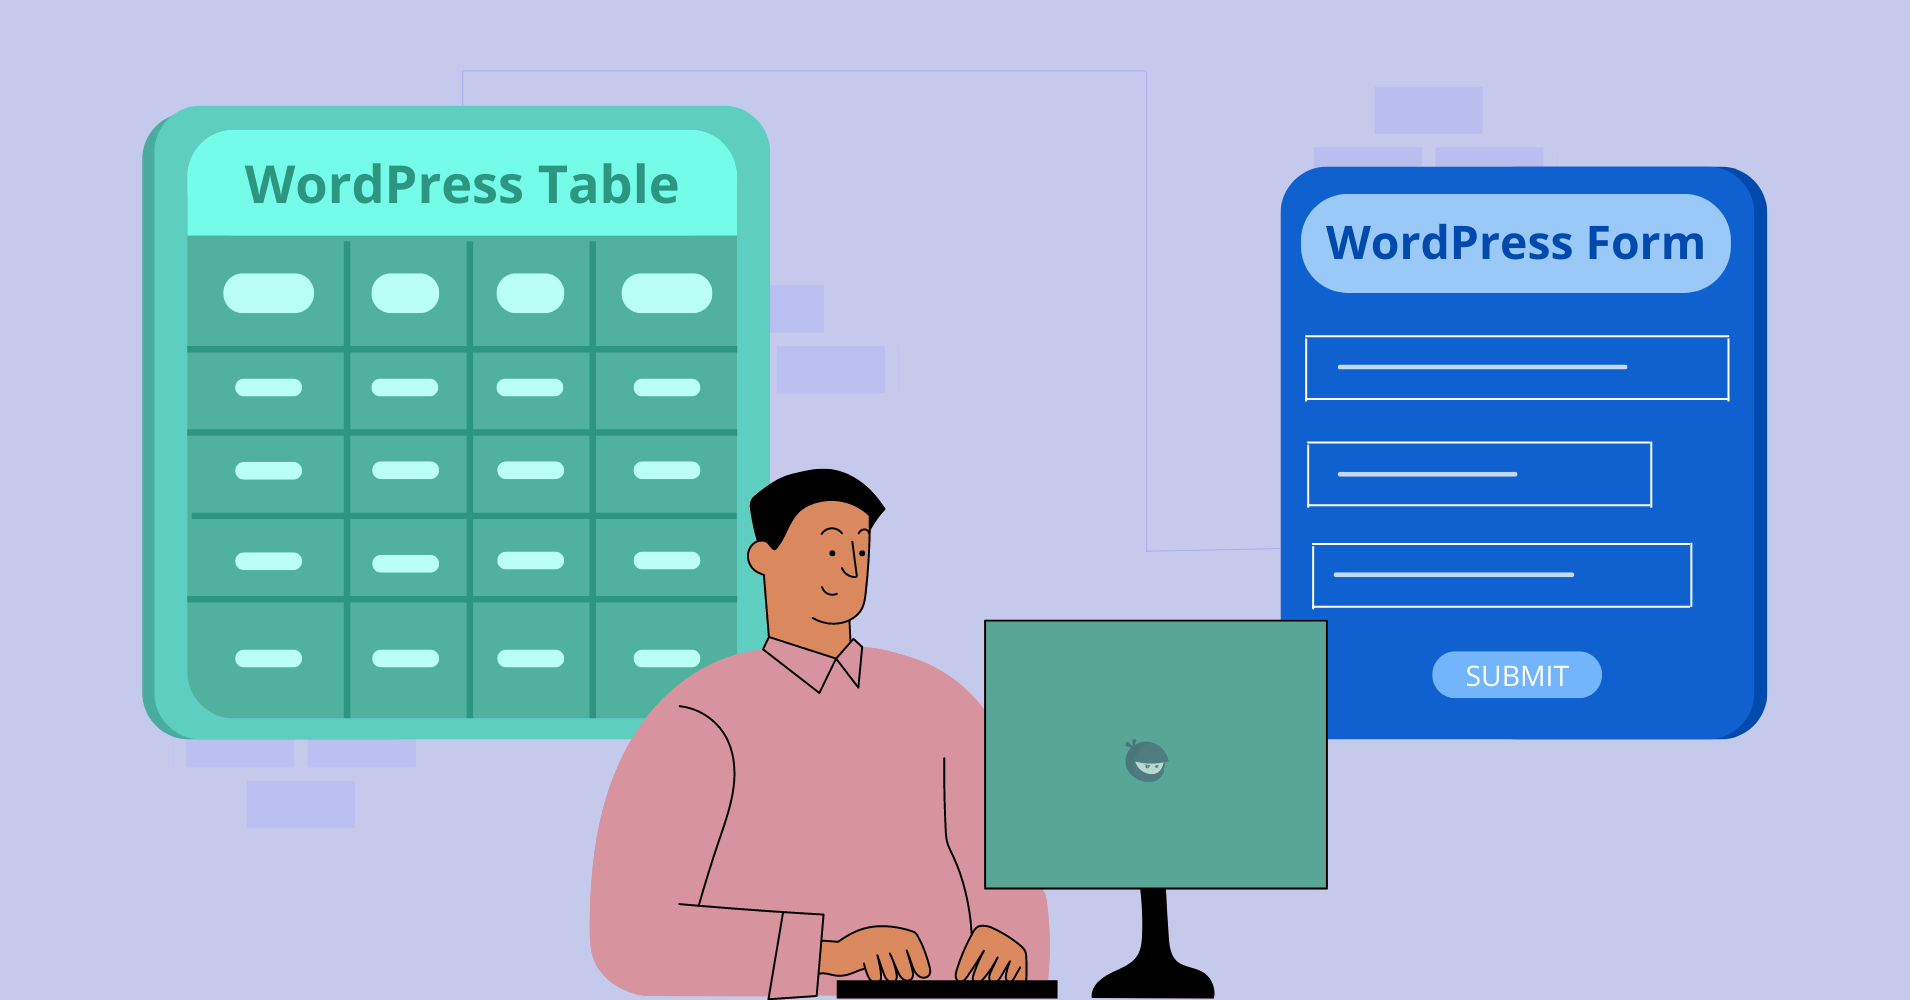 display form data in a table using WordPress plugins